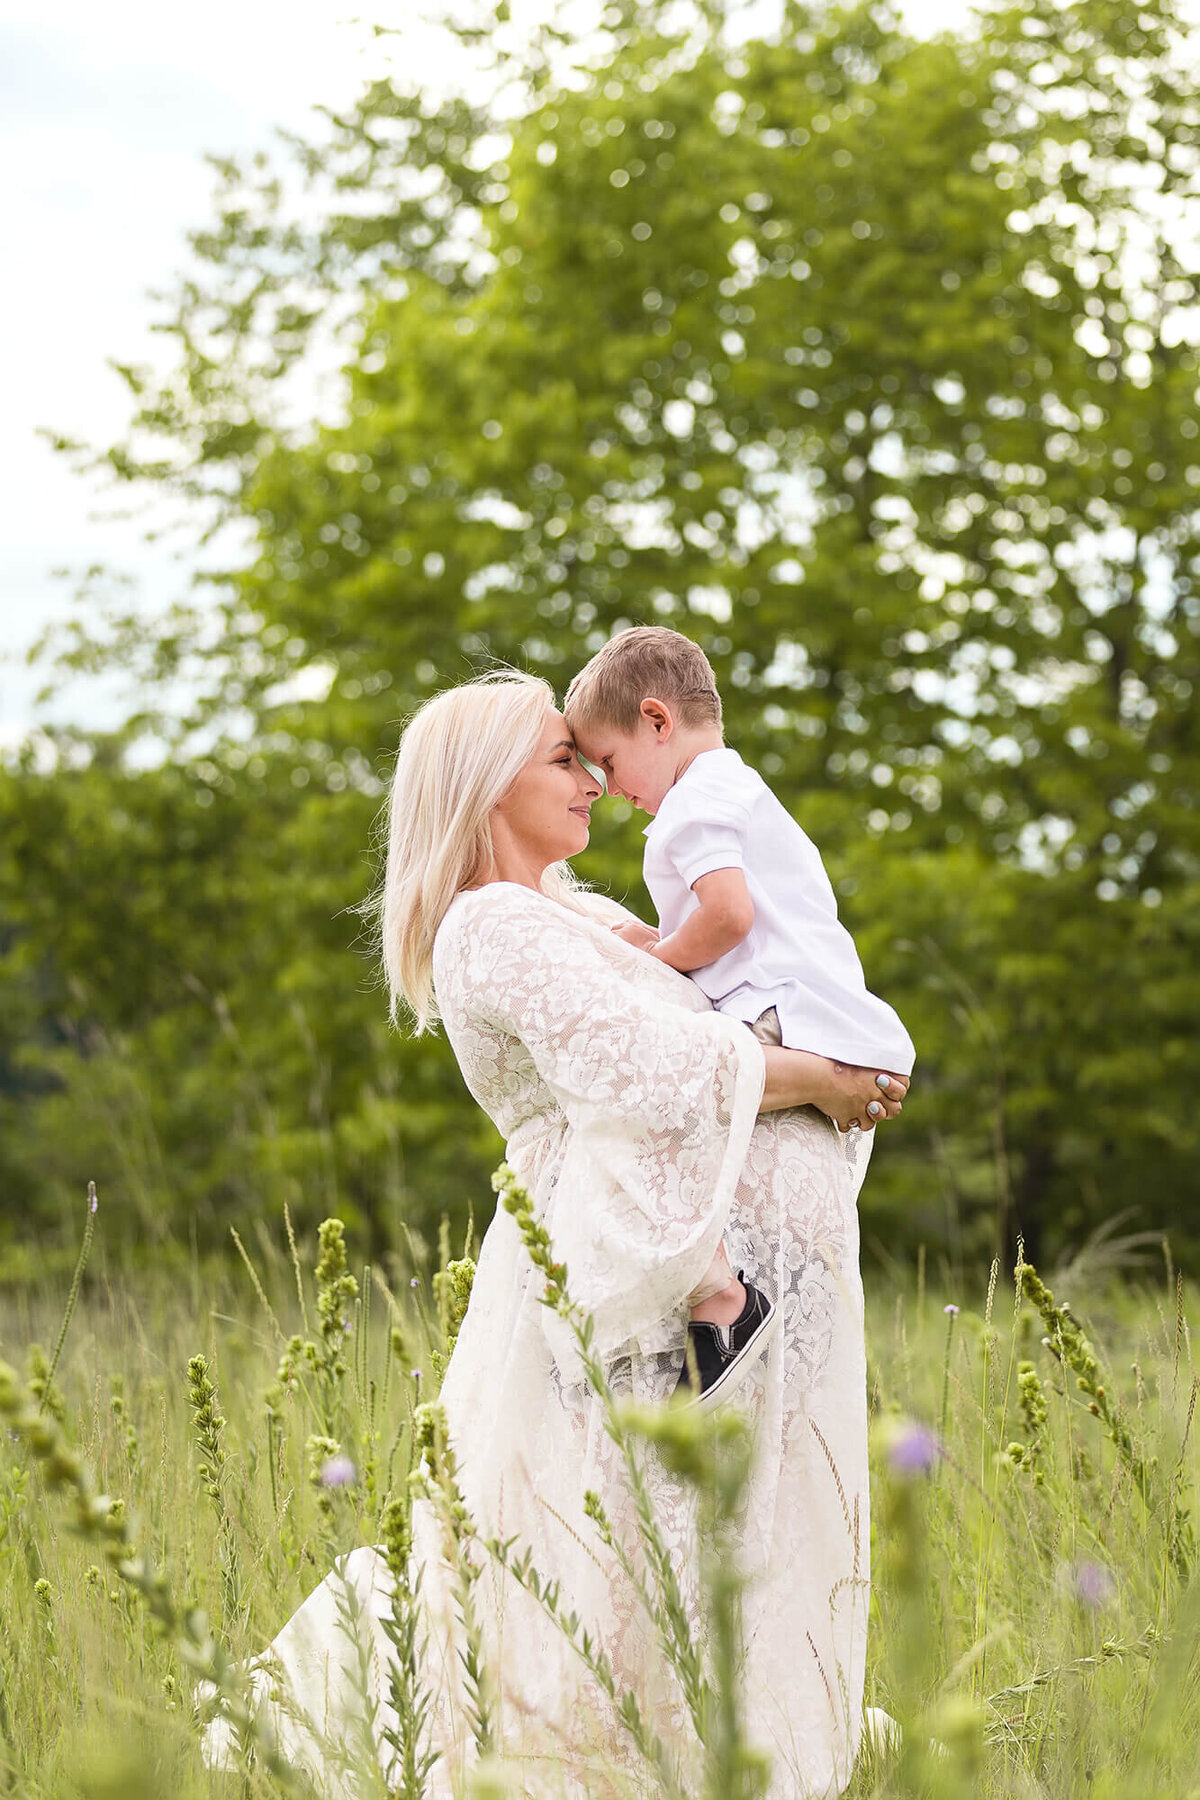 Mother and son moment during a maternity portrait session in New Ulm, Minnesota.